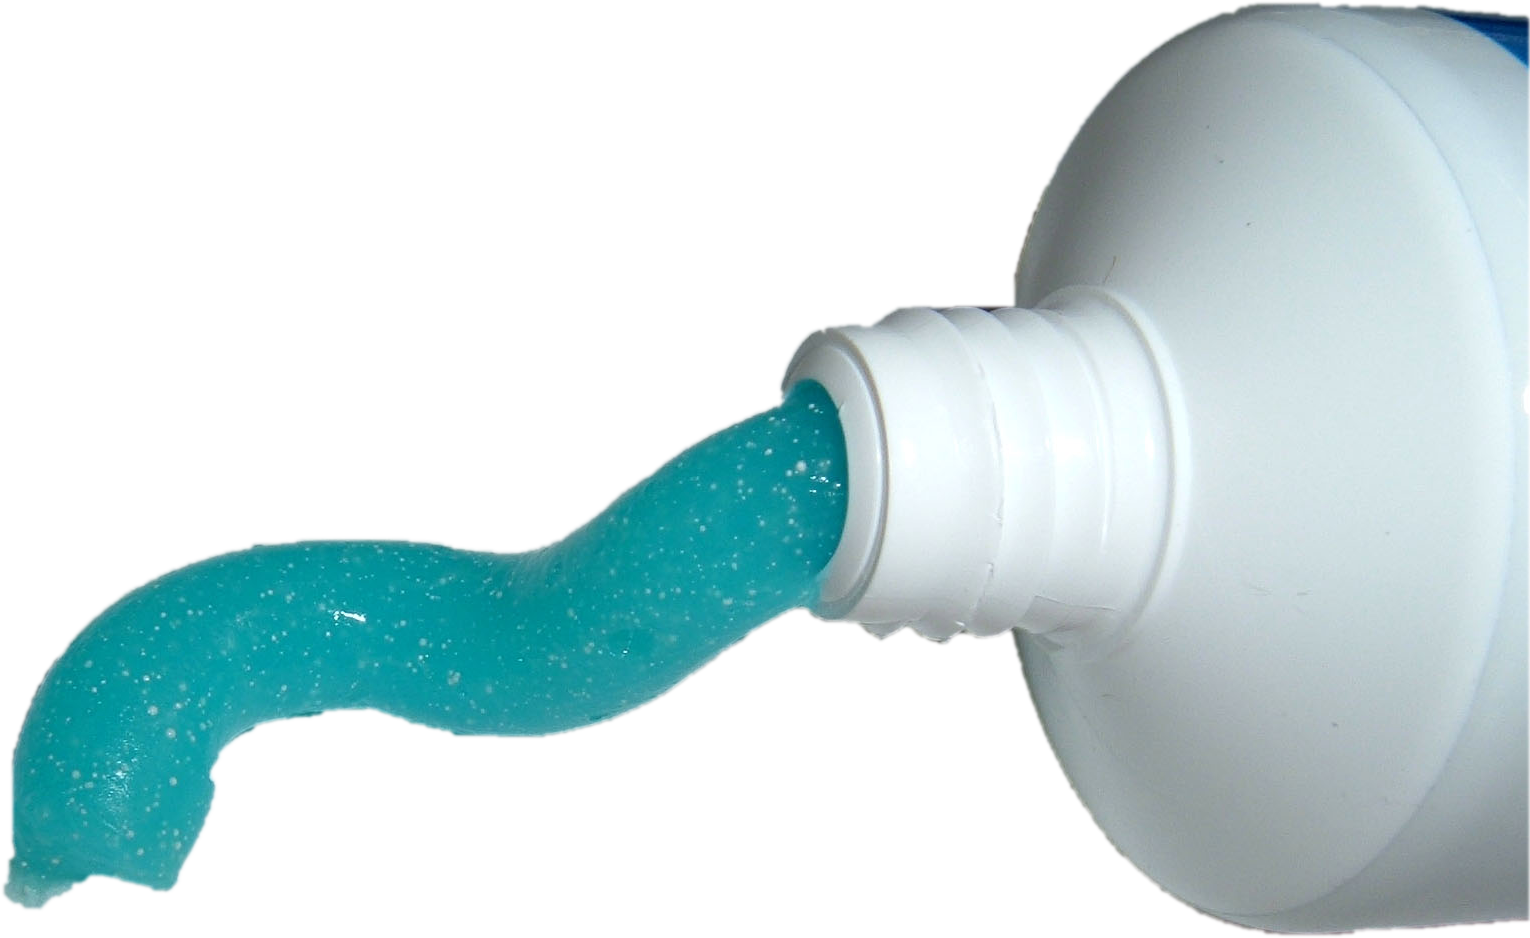 tooth clipart toothpaste